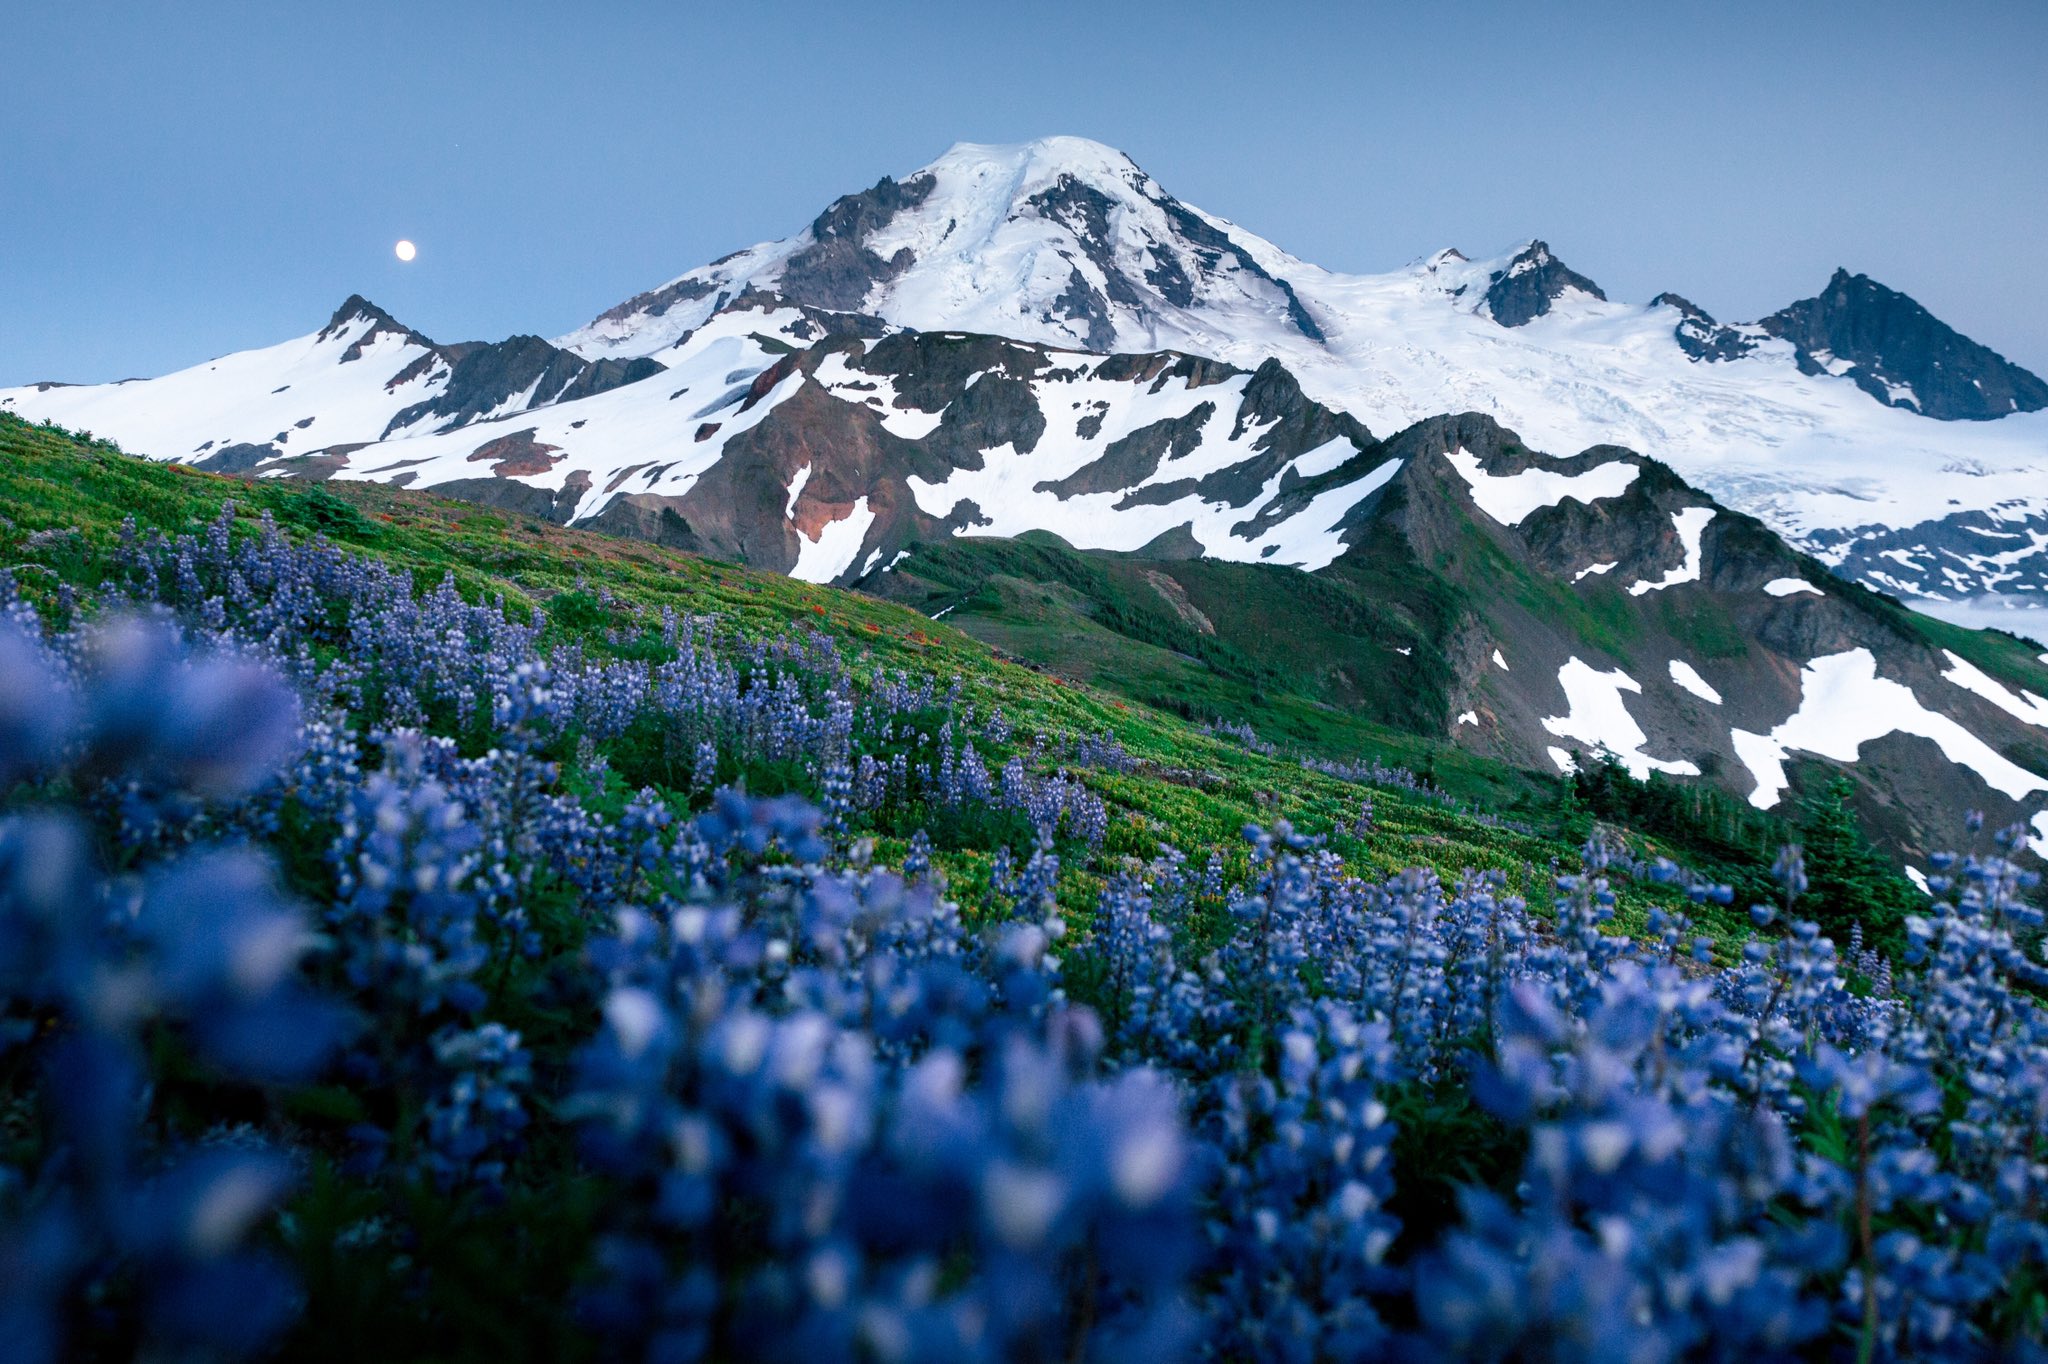 General 2048x1364 nature Moon mountains landscape sky flowers grass snow ice blue flowers lupines Washington